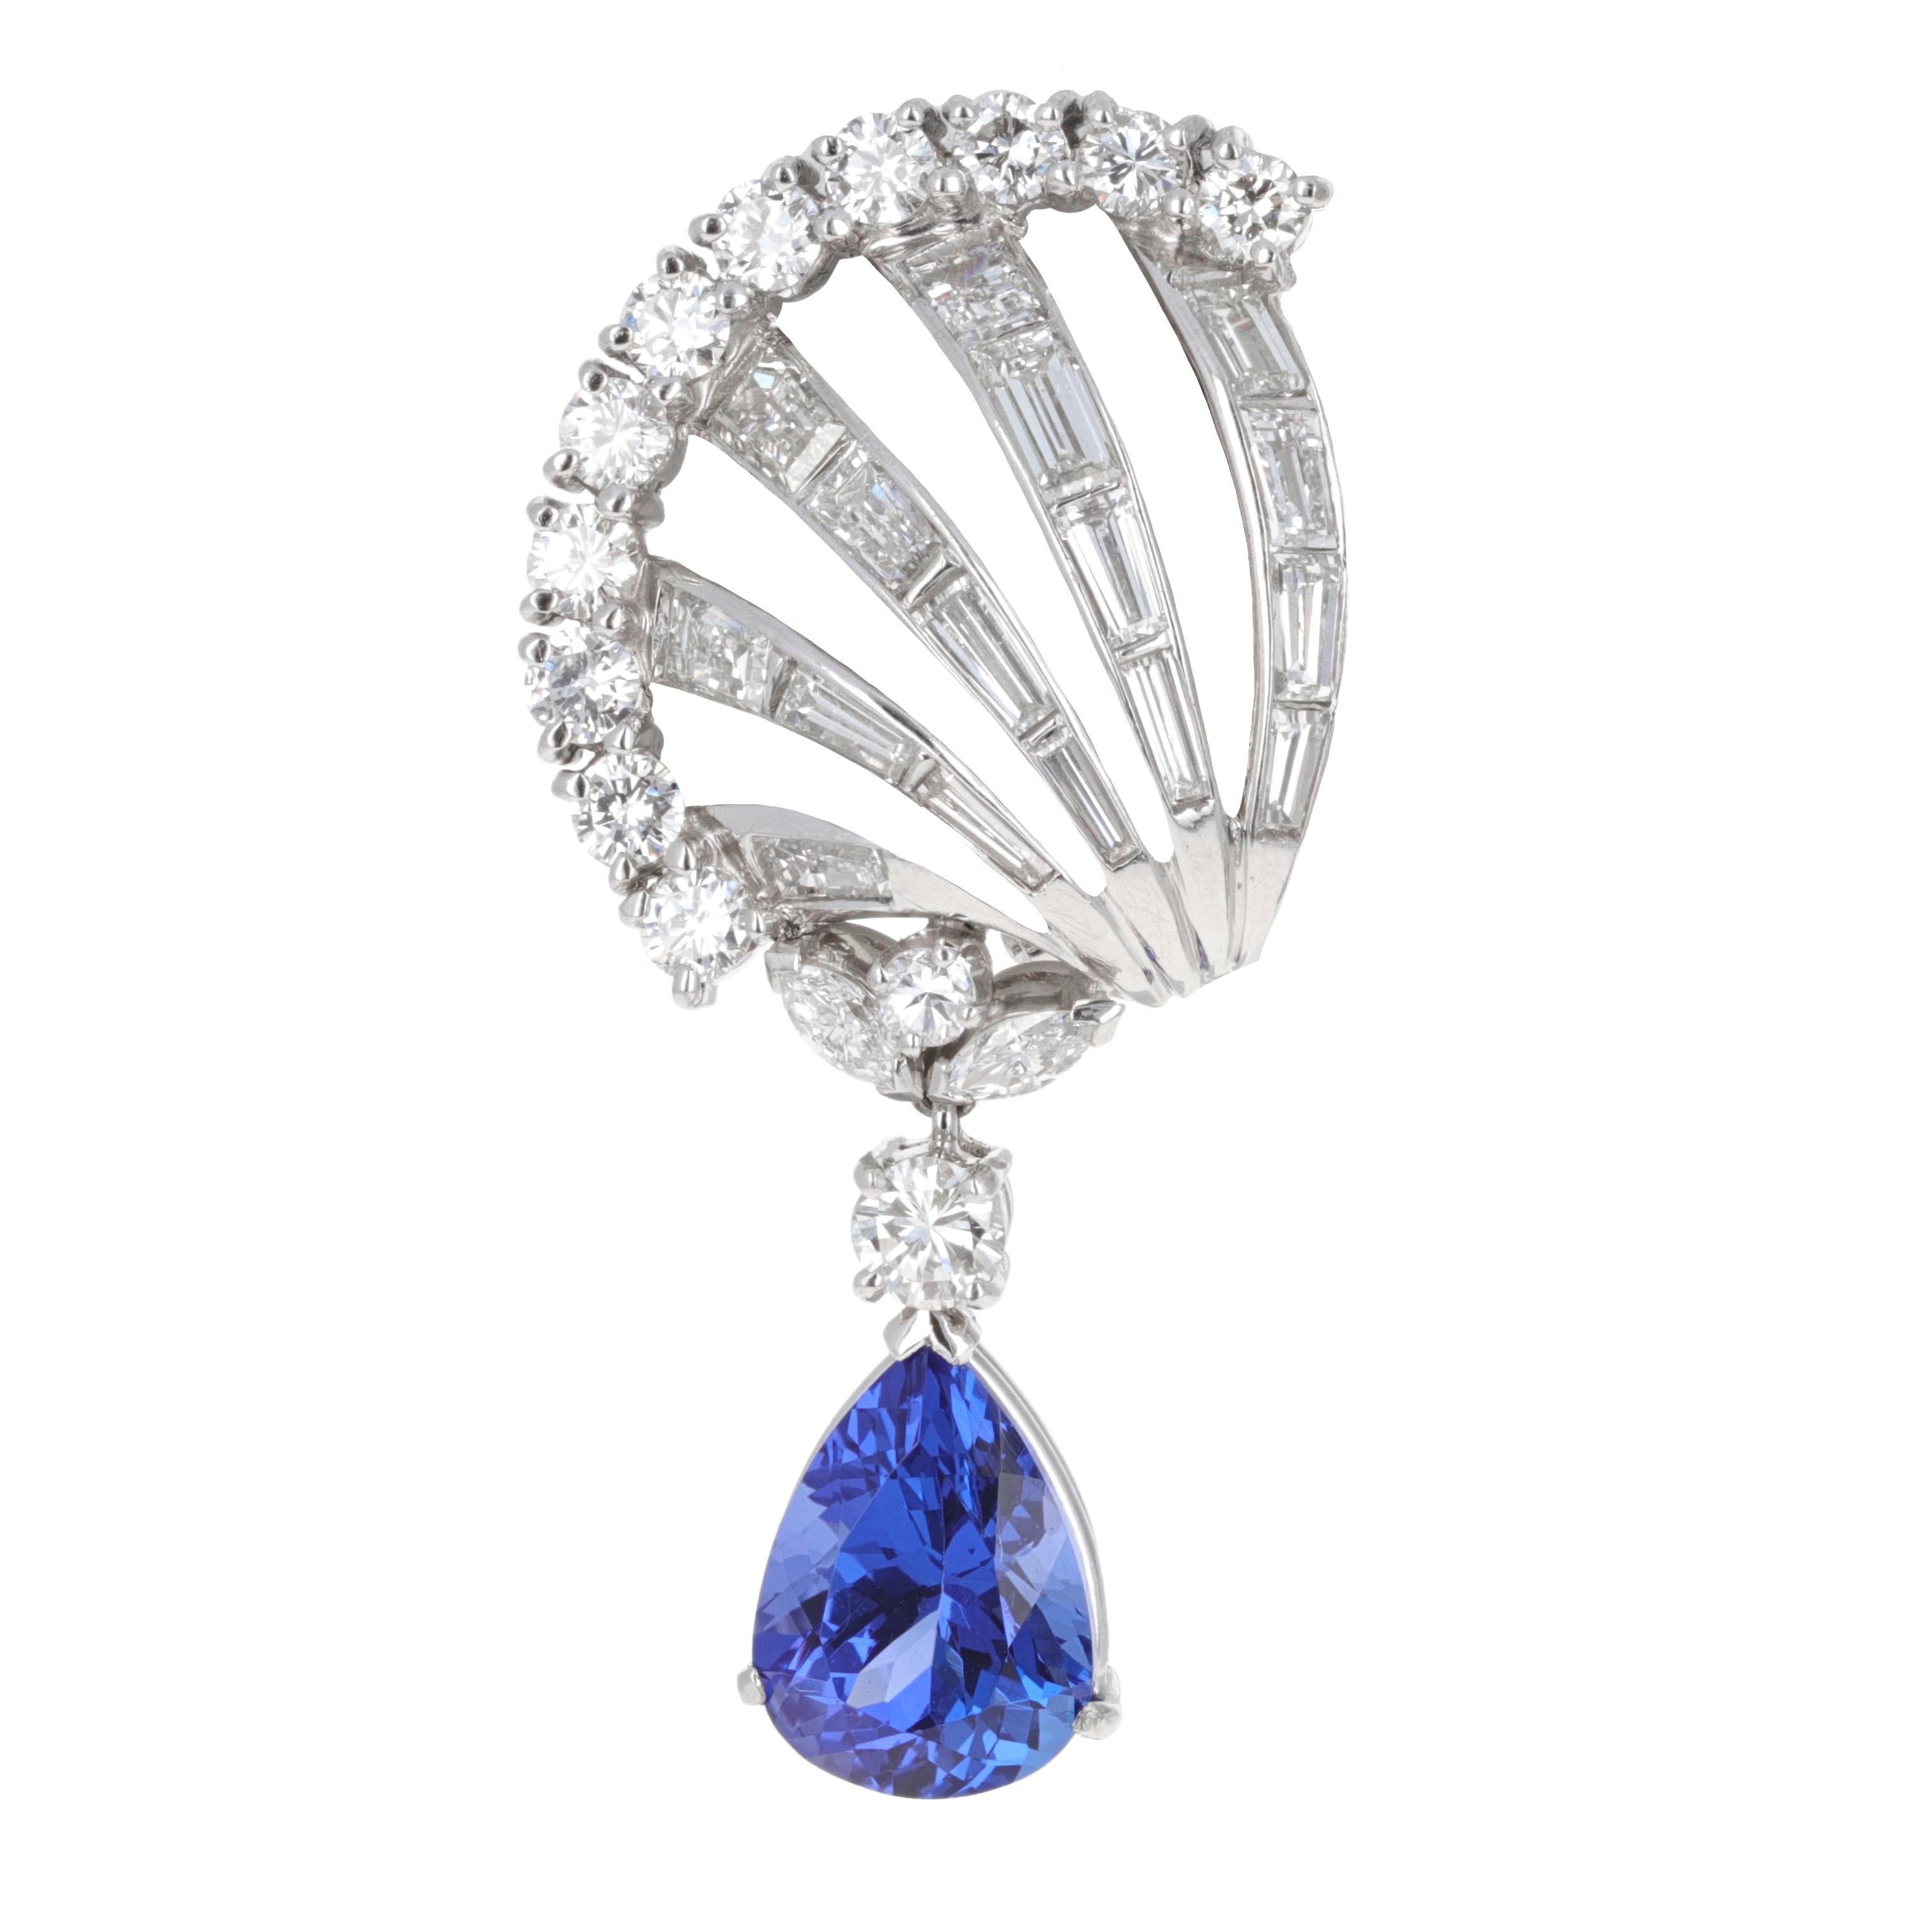 Art Deco Diamond and Tanzanite clip-on dangle earrings. The earrings are made in platinum and 14 karat white gold. There is an estimated total weight of diamonds weighing 3.85 carats in the earrings. The earrings have 26 round brilliant diamonds